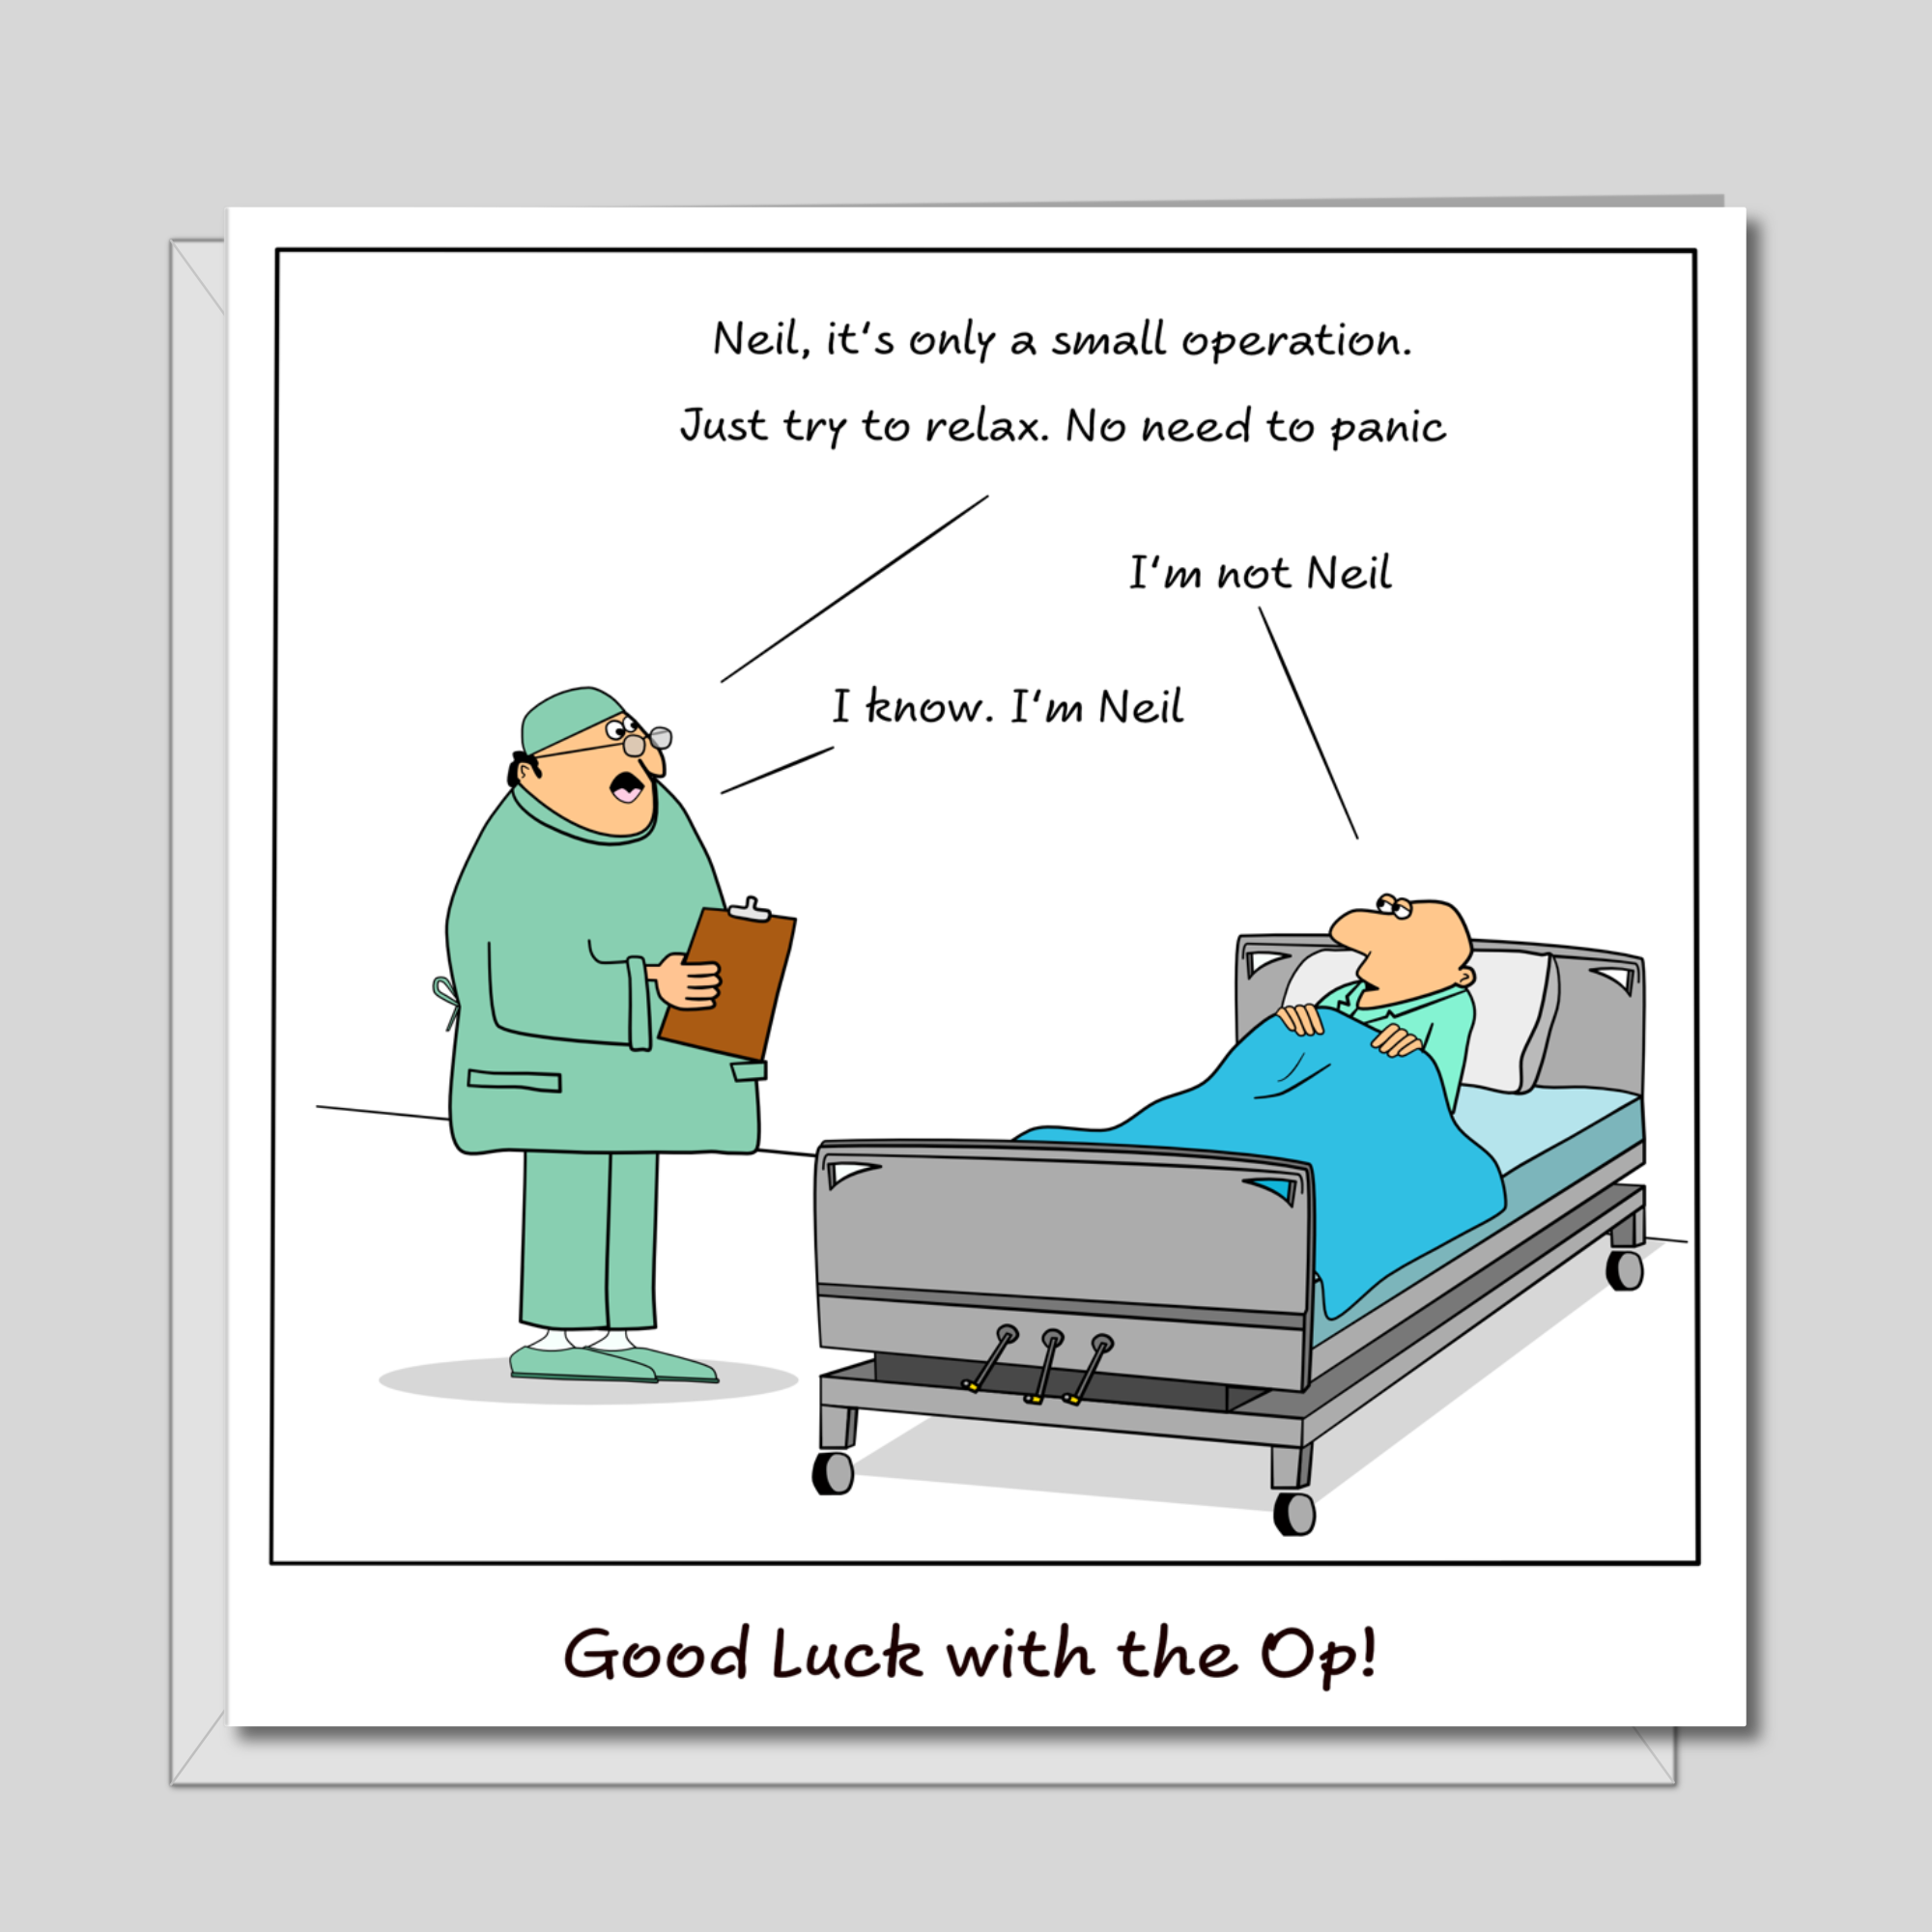 Funny Knee Replacement Surgery Card - Get Well Soon Card, Operation Recovery, Funny, humorous,Funny Card for Hip / Knee Surgery / Operation Card - Get Well Soon Card - Quick Recovery, Congratulations -  Hospital Humorous / Humour